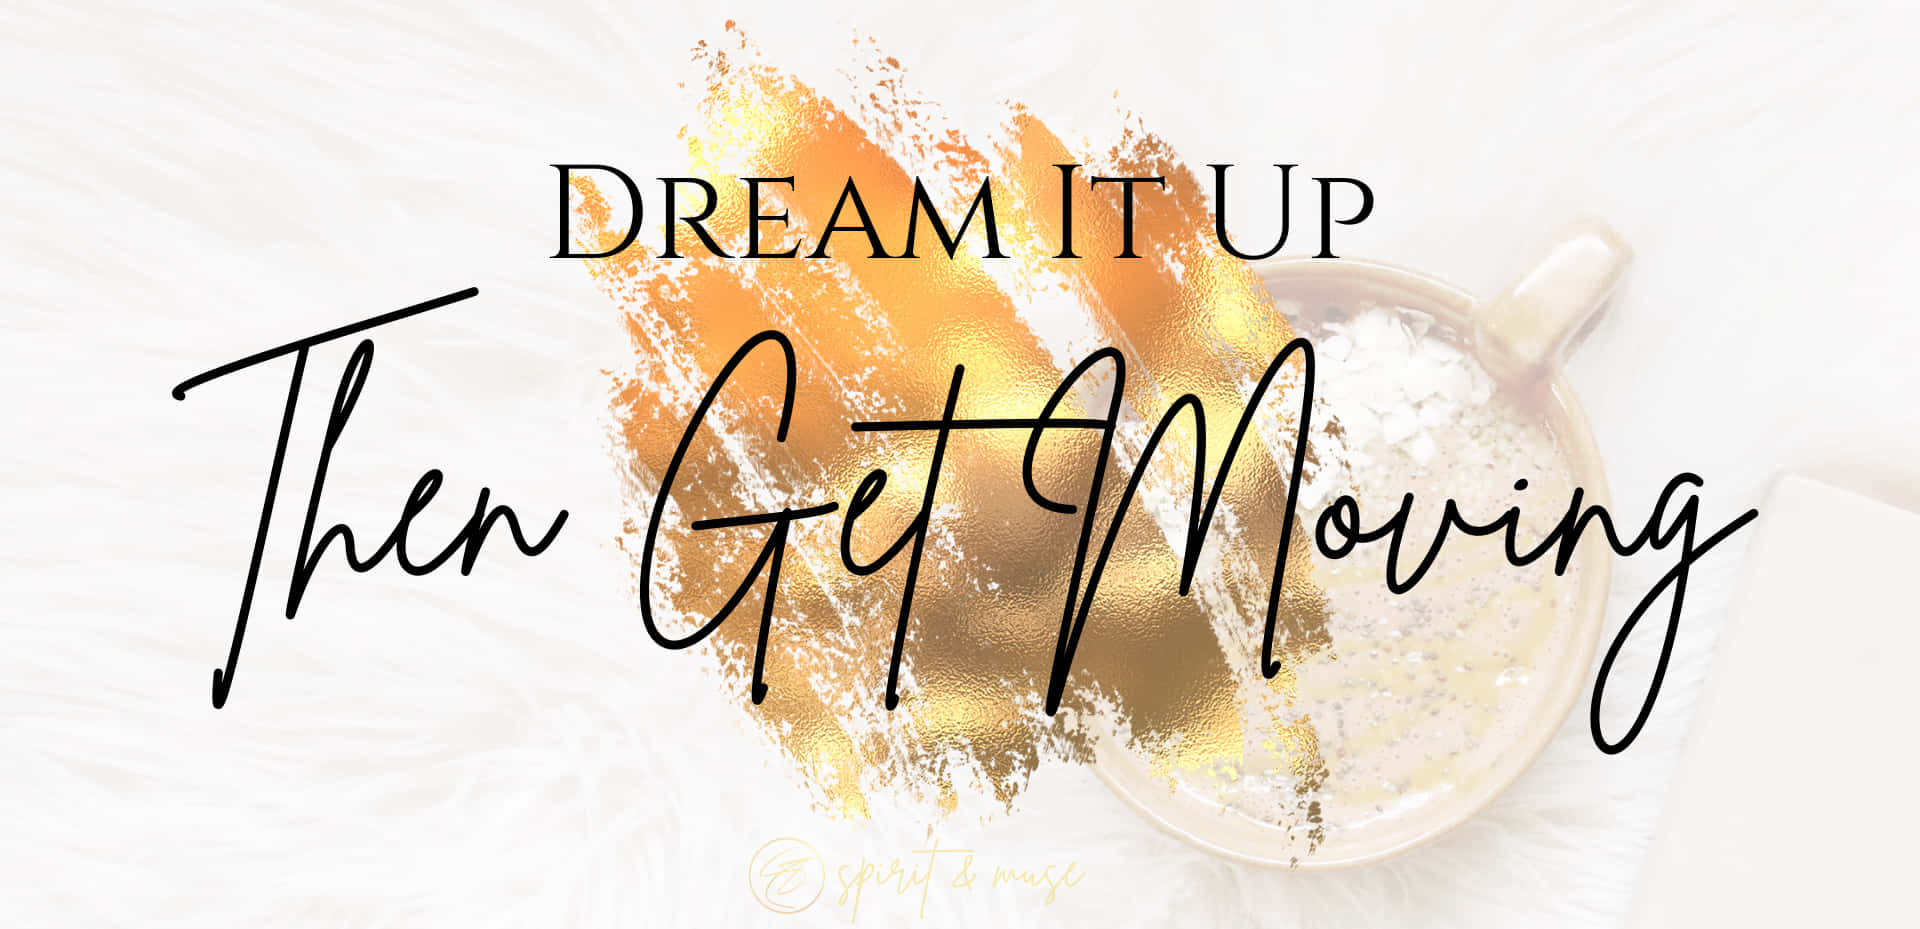 Dream It Up Then Get Moving Background